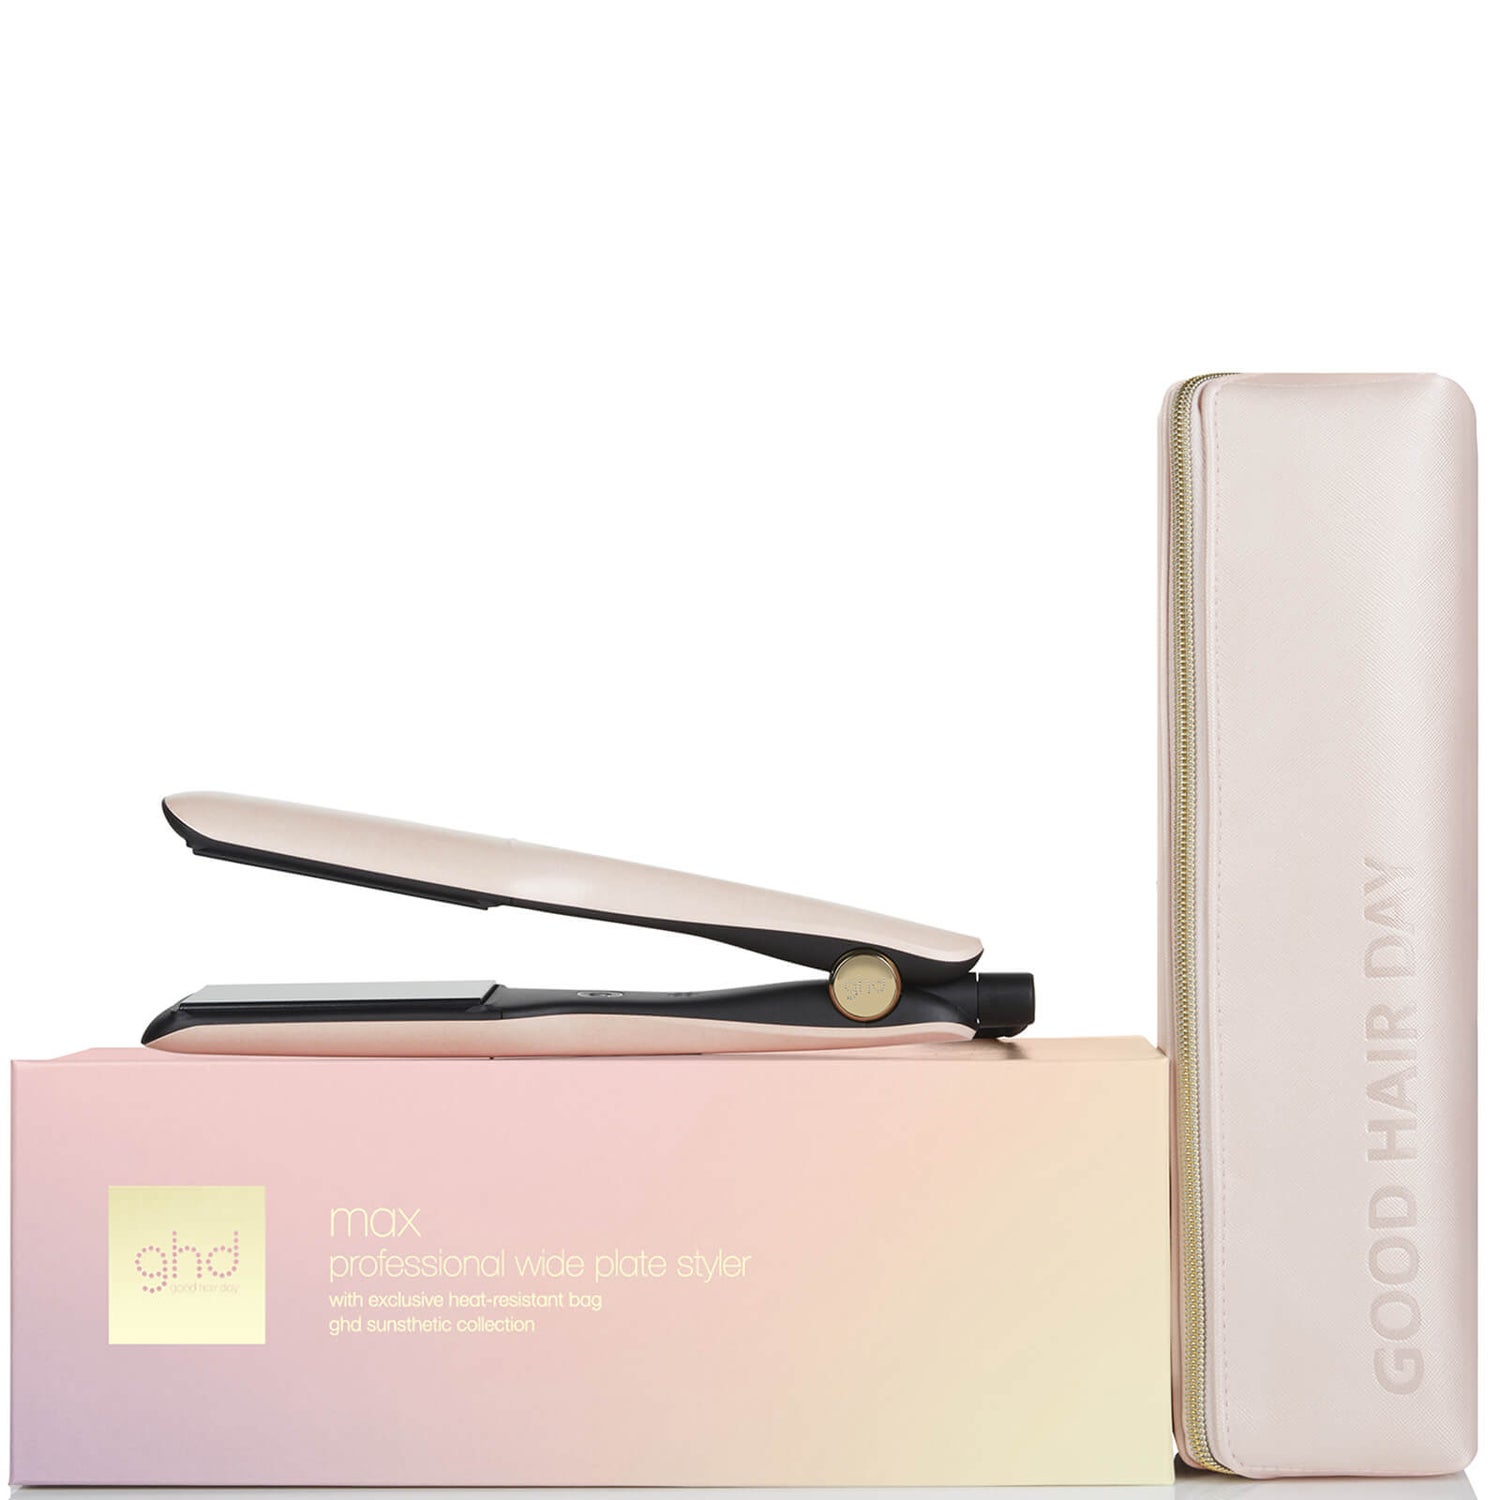 ghd Sunsthetic Collection Max Straighteners - Rose Gold